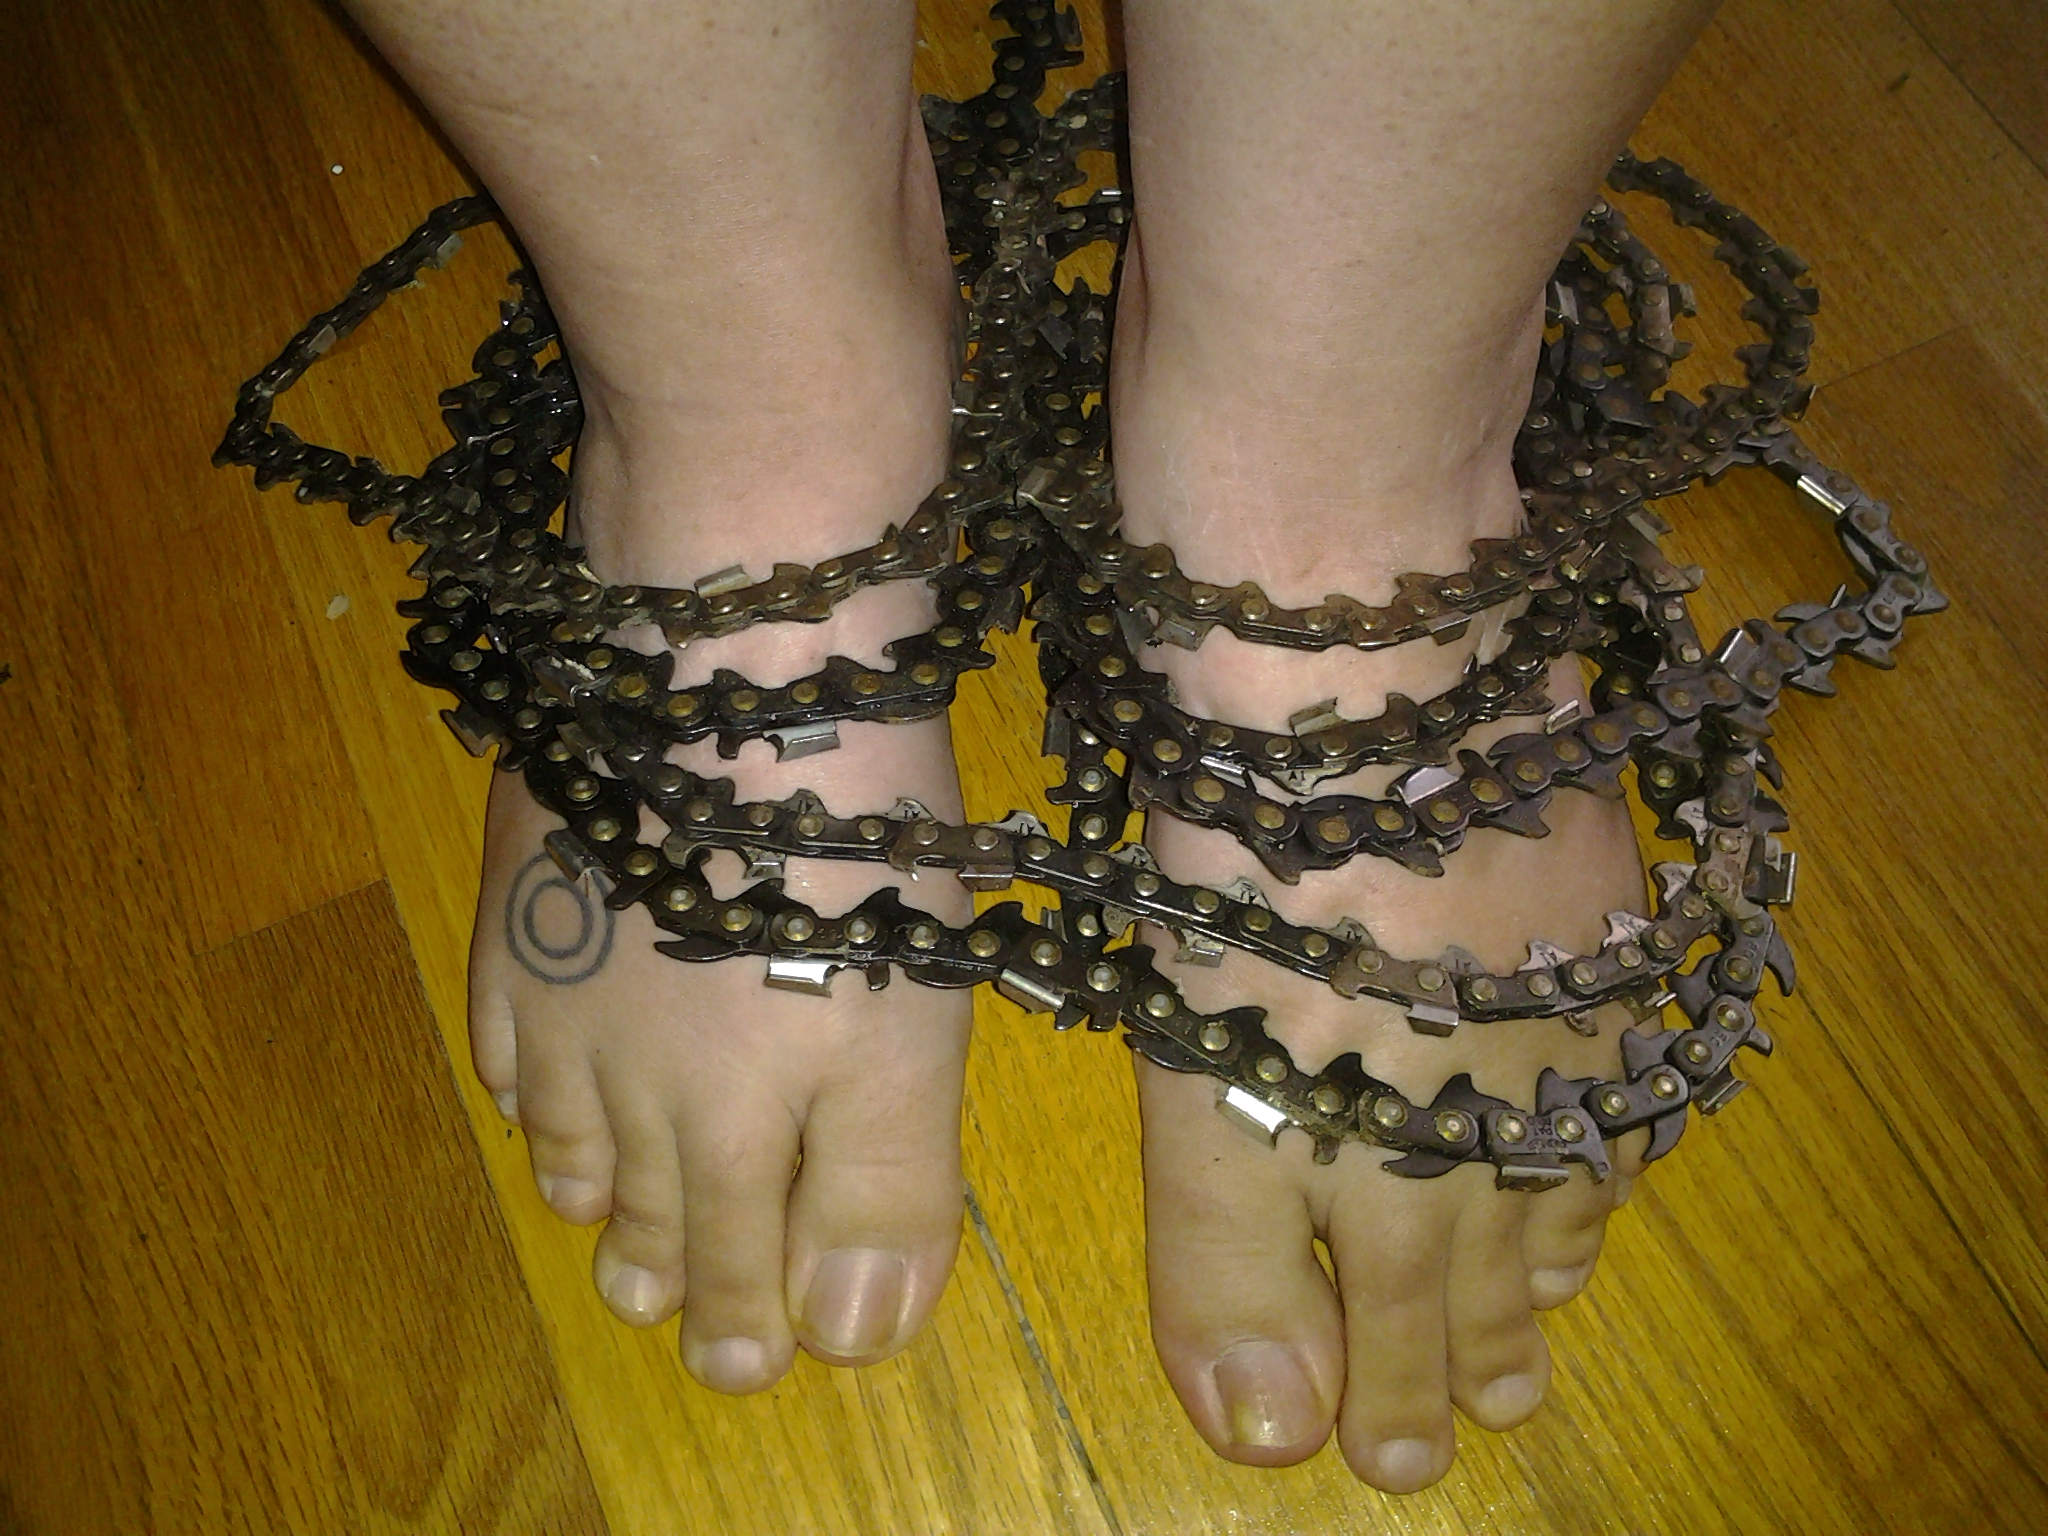 Two feet surrounded by a bike chain